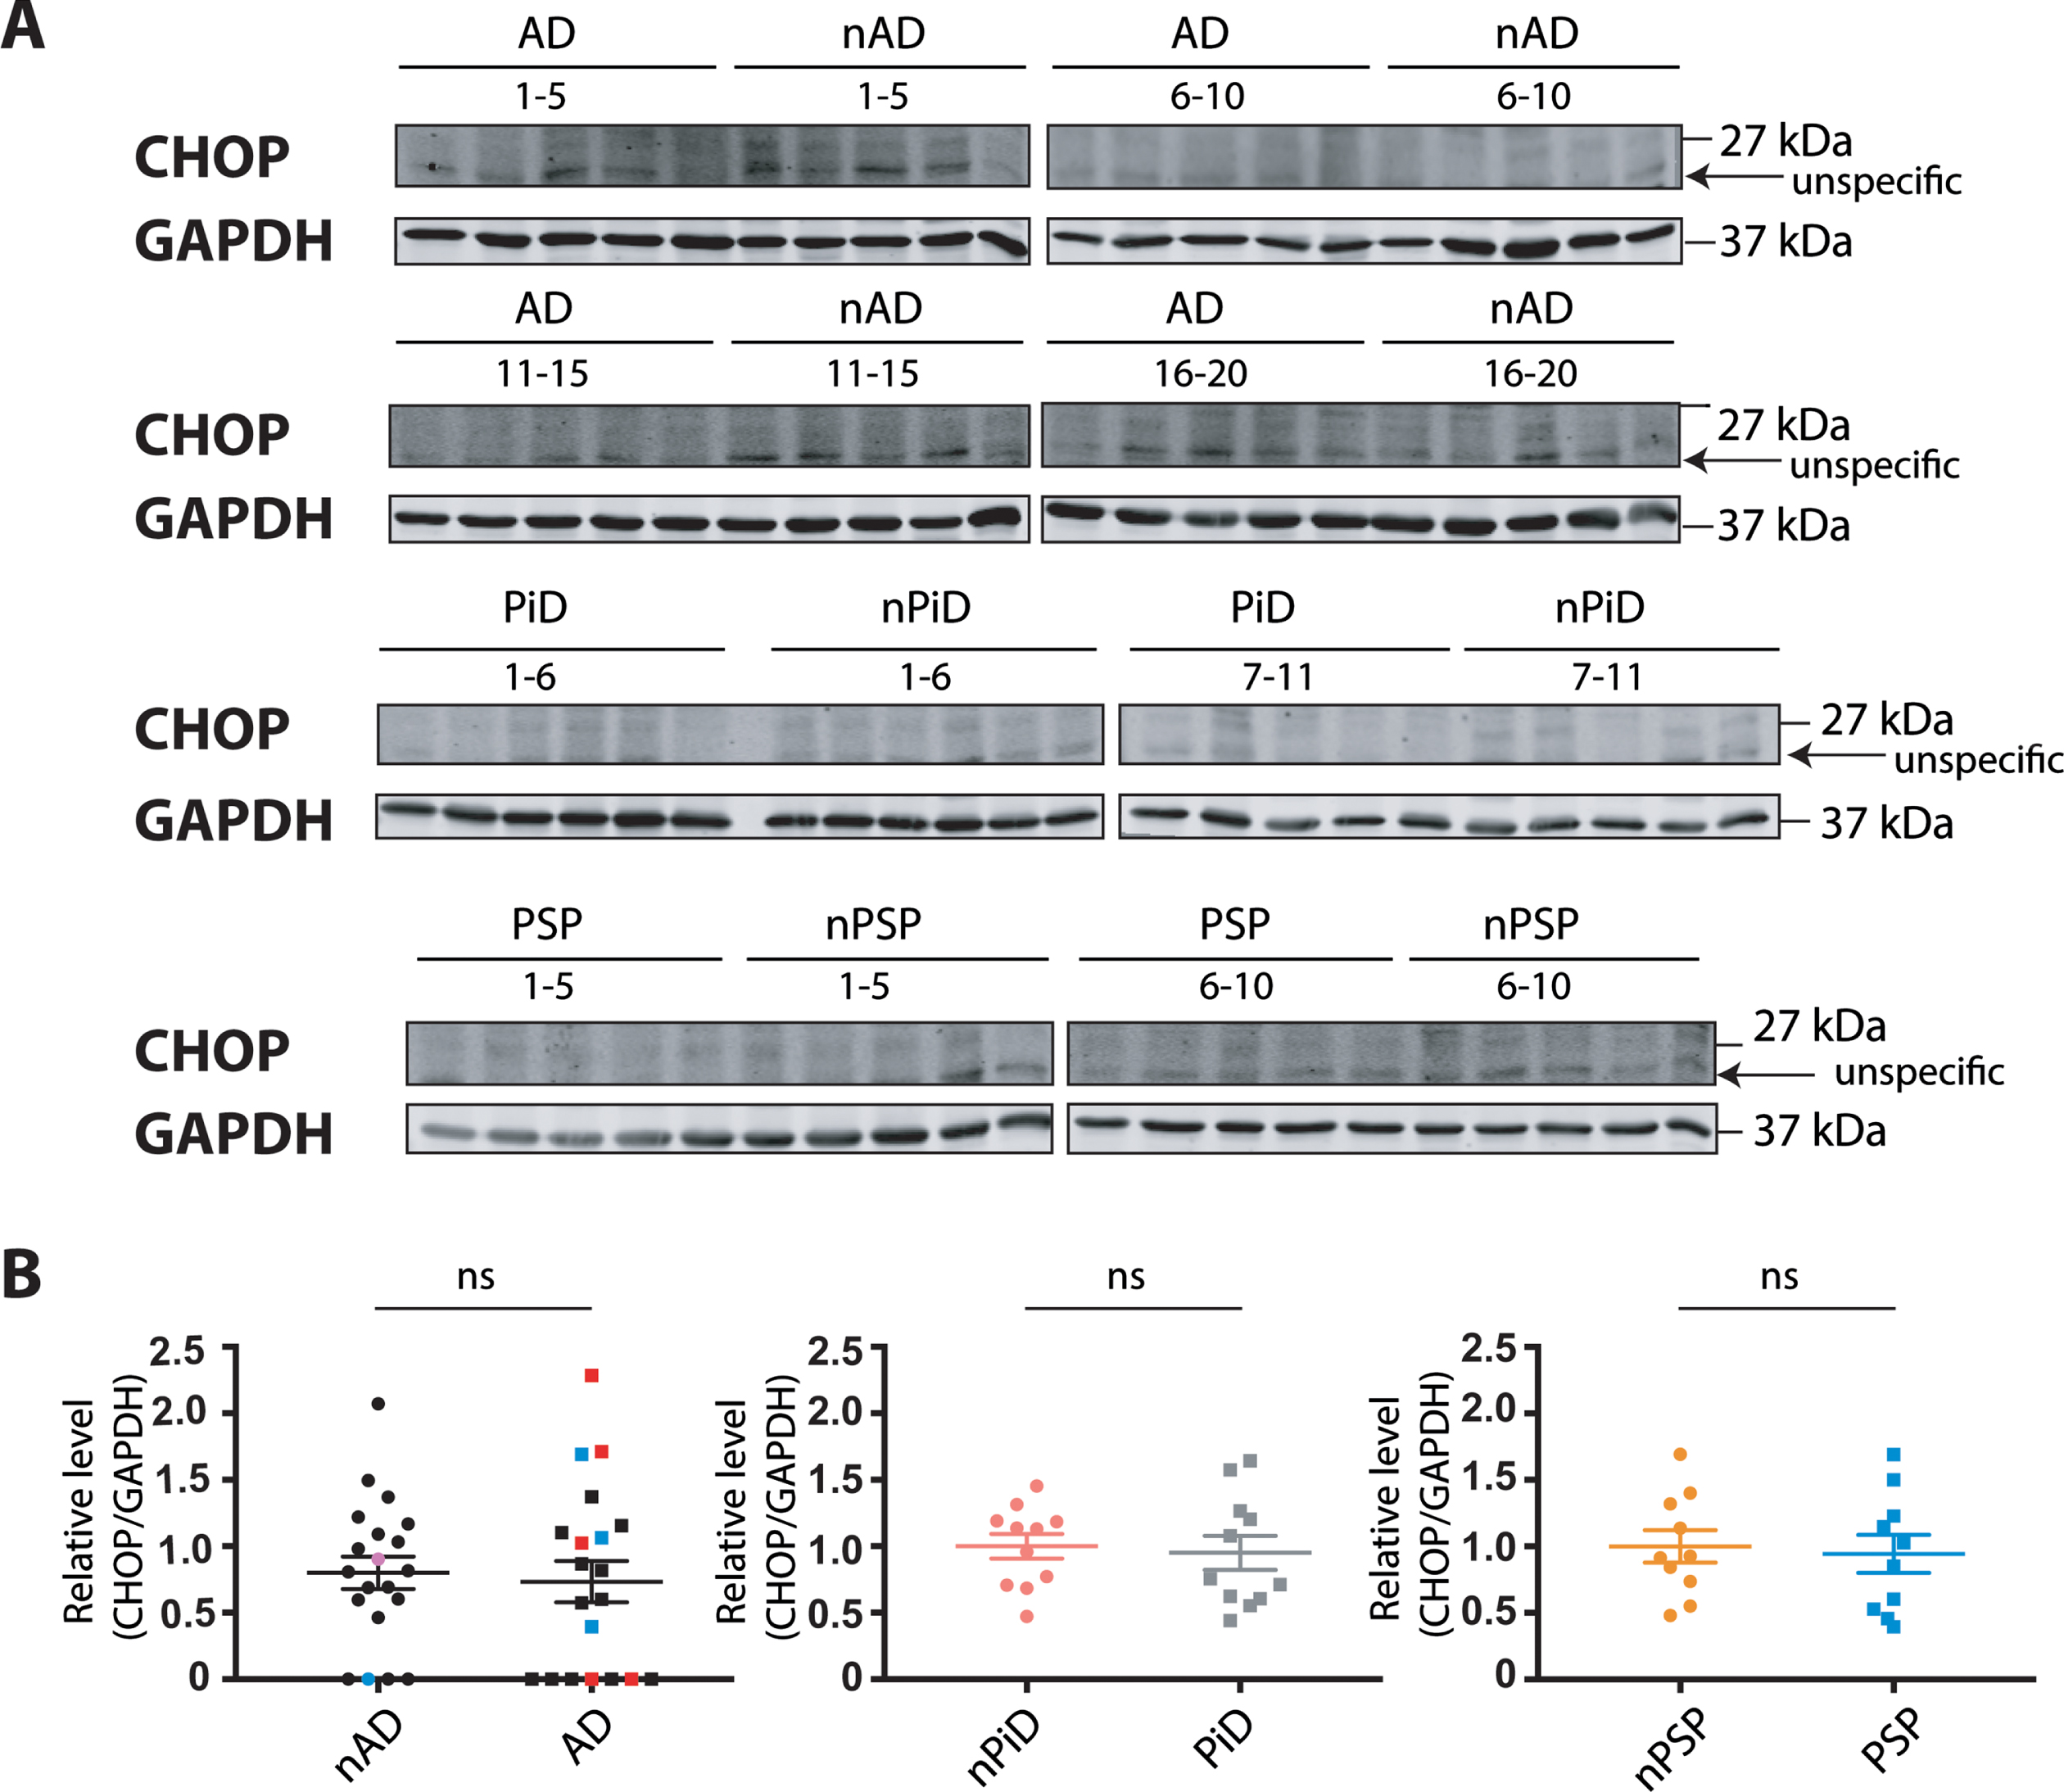 CHOP protein expression in tauopathies and age-matched non-demented controls. A) CHOP and GAPDH immunoreactivity for AD, PiD, and PSP together with relative age-matched non-demented controls. B) Quantification of CHOP immunoreactivity from individual samples was normalized to the immunoreactivity of a loading control, GAPDH. Data were analyzed using Mann-Whitney test (AD) or two-tailed unpaired t-test (PiD and PSP) revealing no significant differences (p = 0.6749 and U = 184, p = 0.7539 and t = 0.3178, p = 0.7649 and t = 0.3036 for AD, PiD, and PSP, respectively). Shown are means, error bars are SEM. ns, not significant. Number of cases: ND = 20, AD = 20, nPiD = 11, PiD = 11, nPSP = 10, PSP = 10. Each lane corresponds to one individual case. Colored symbols for nAD, AD cases correspond to individuals with LBD co-morbidity (red), APOE 4.4 genotype (blue), and CVD co-morbidity (magenta).